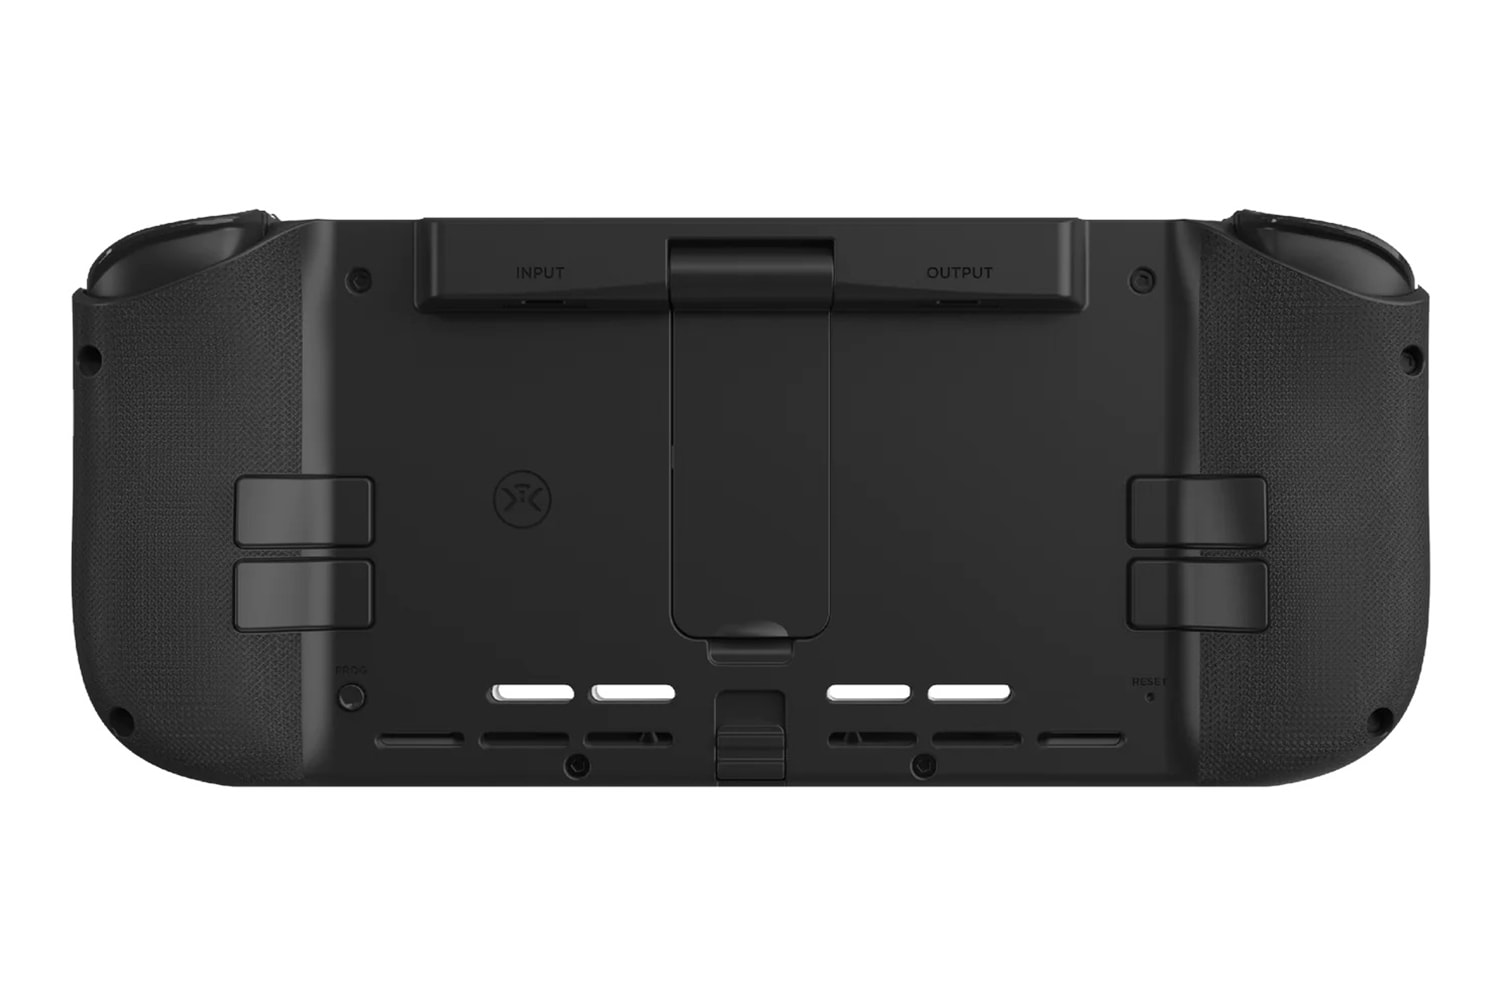 CRKD's $60 Nitro Deck For Nintendo Switch Upgrade Black Friday Gaming Sales